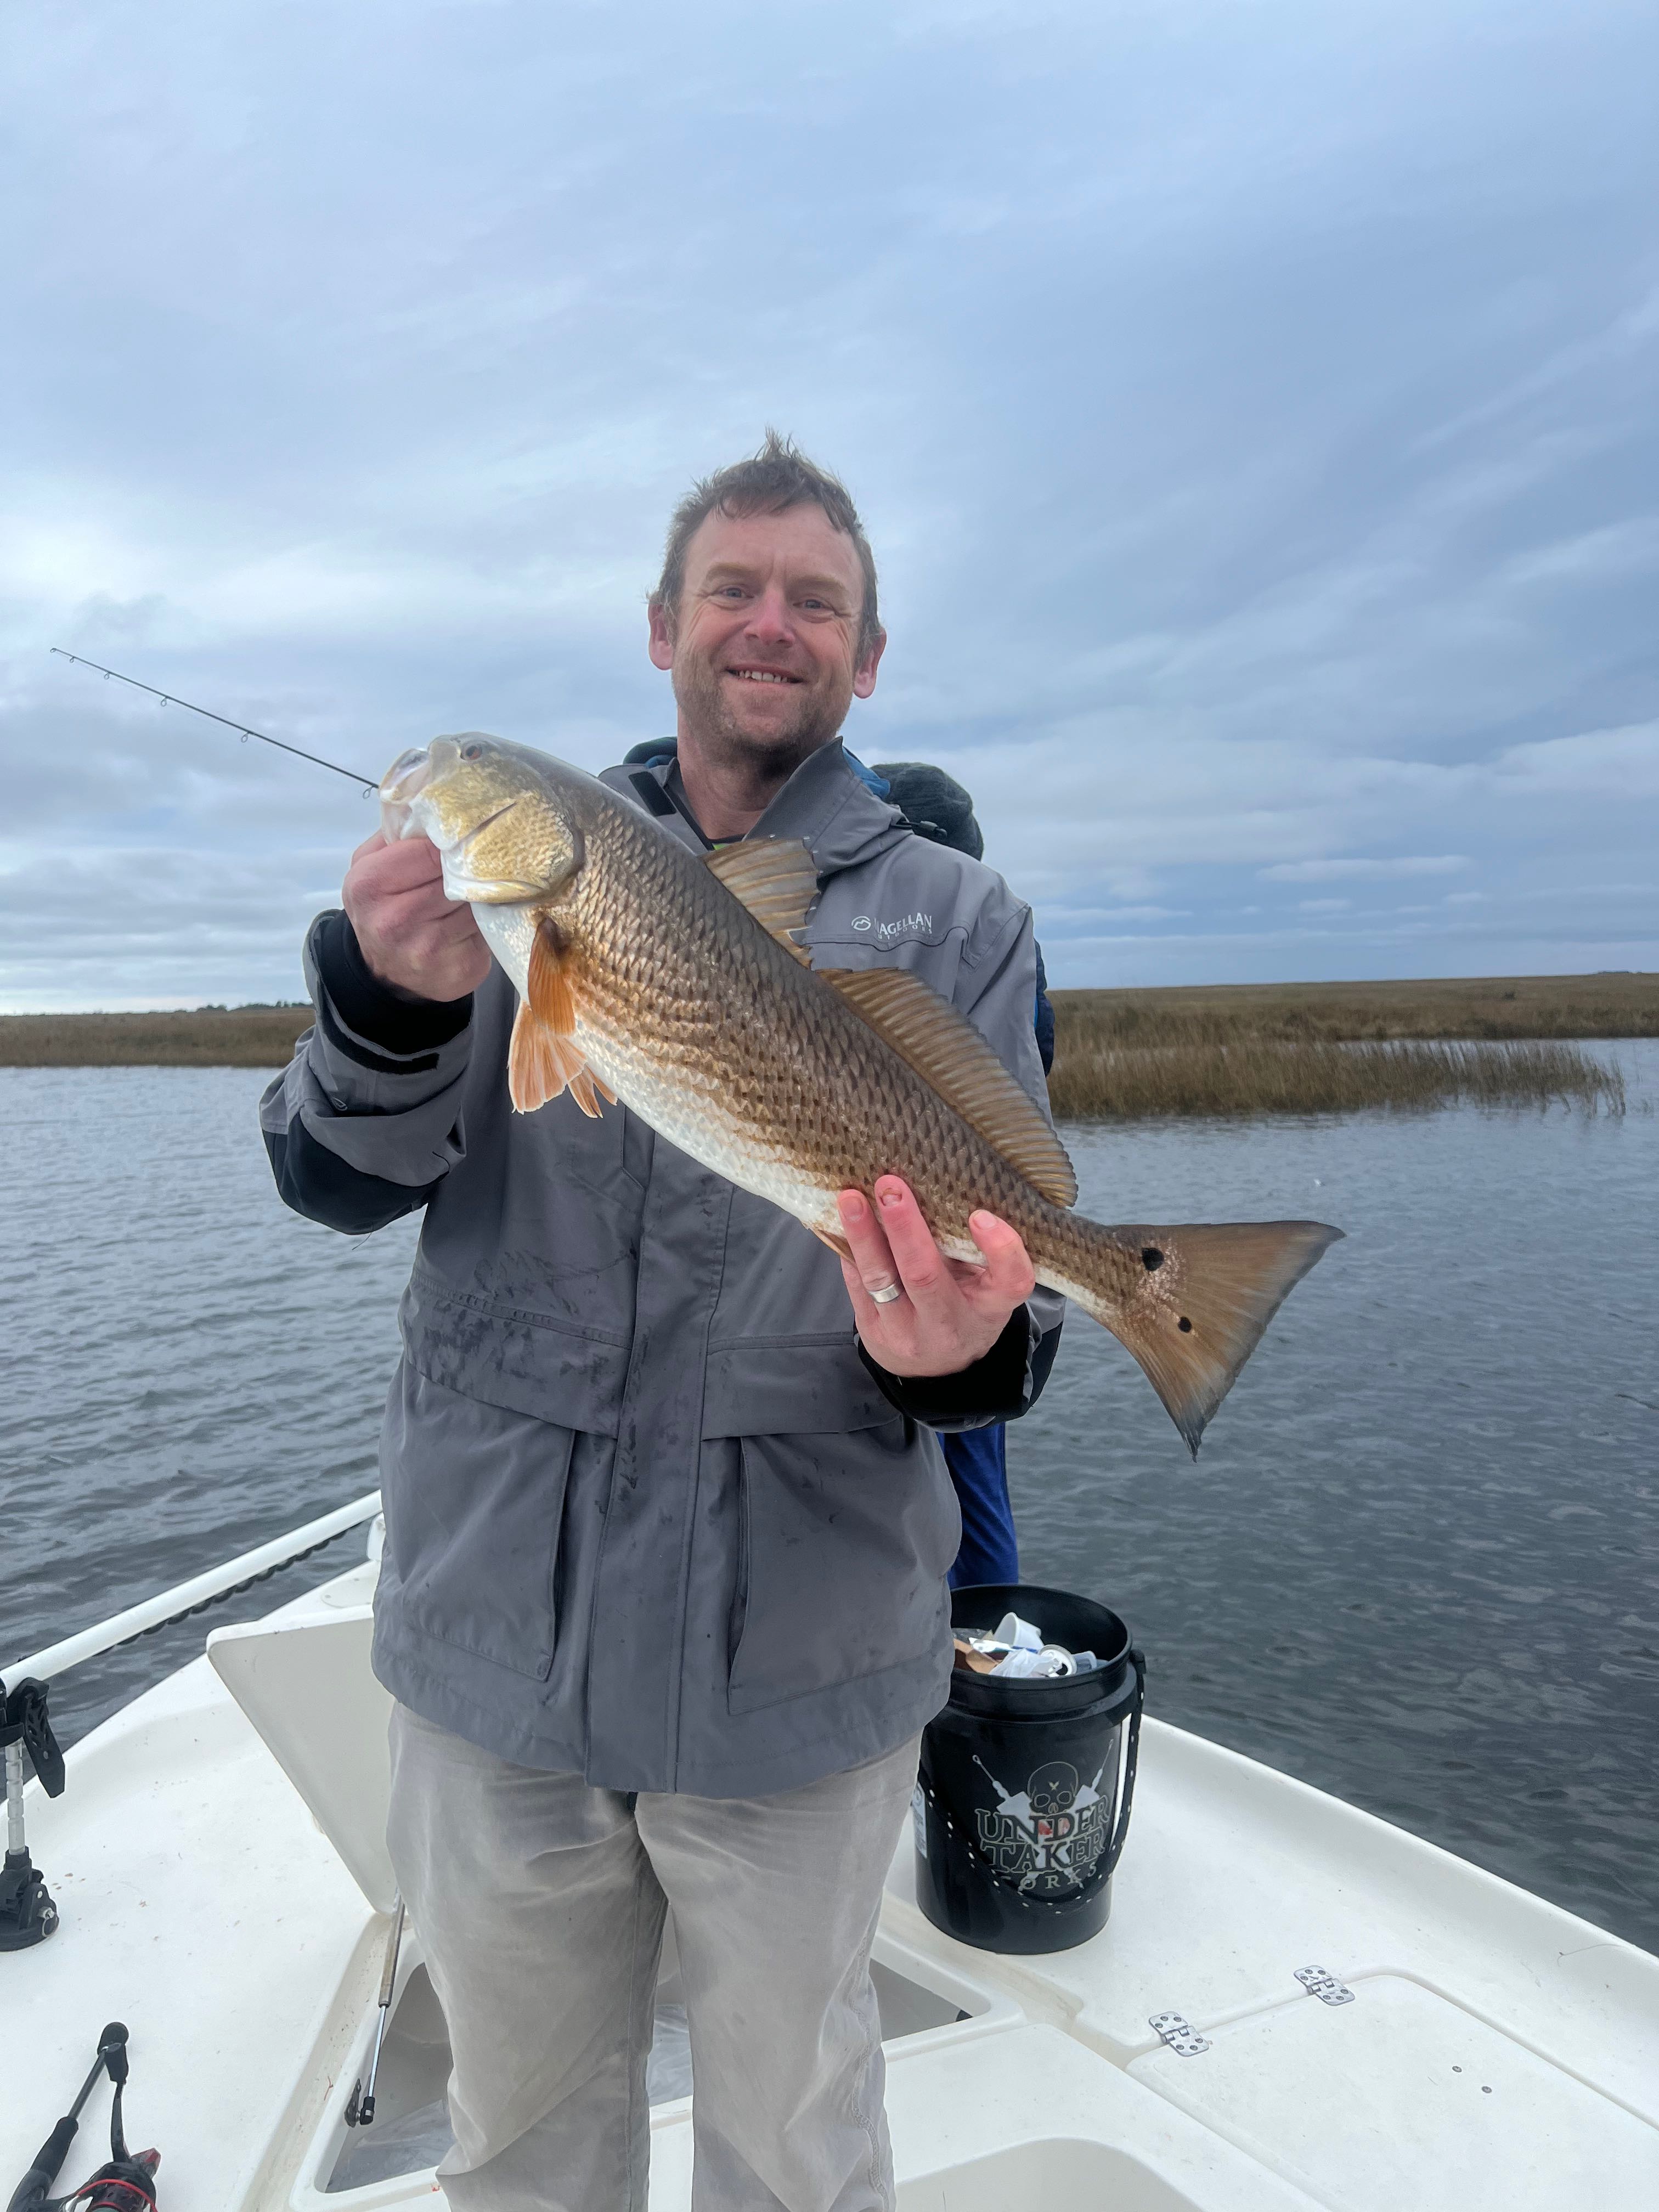 Jeremy with a sweet redfish